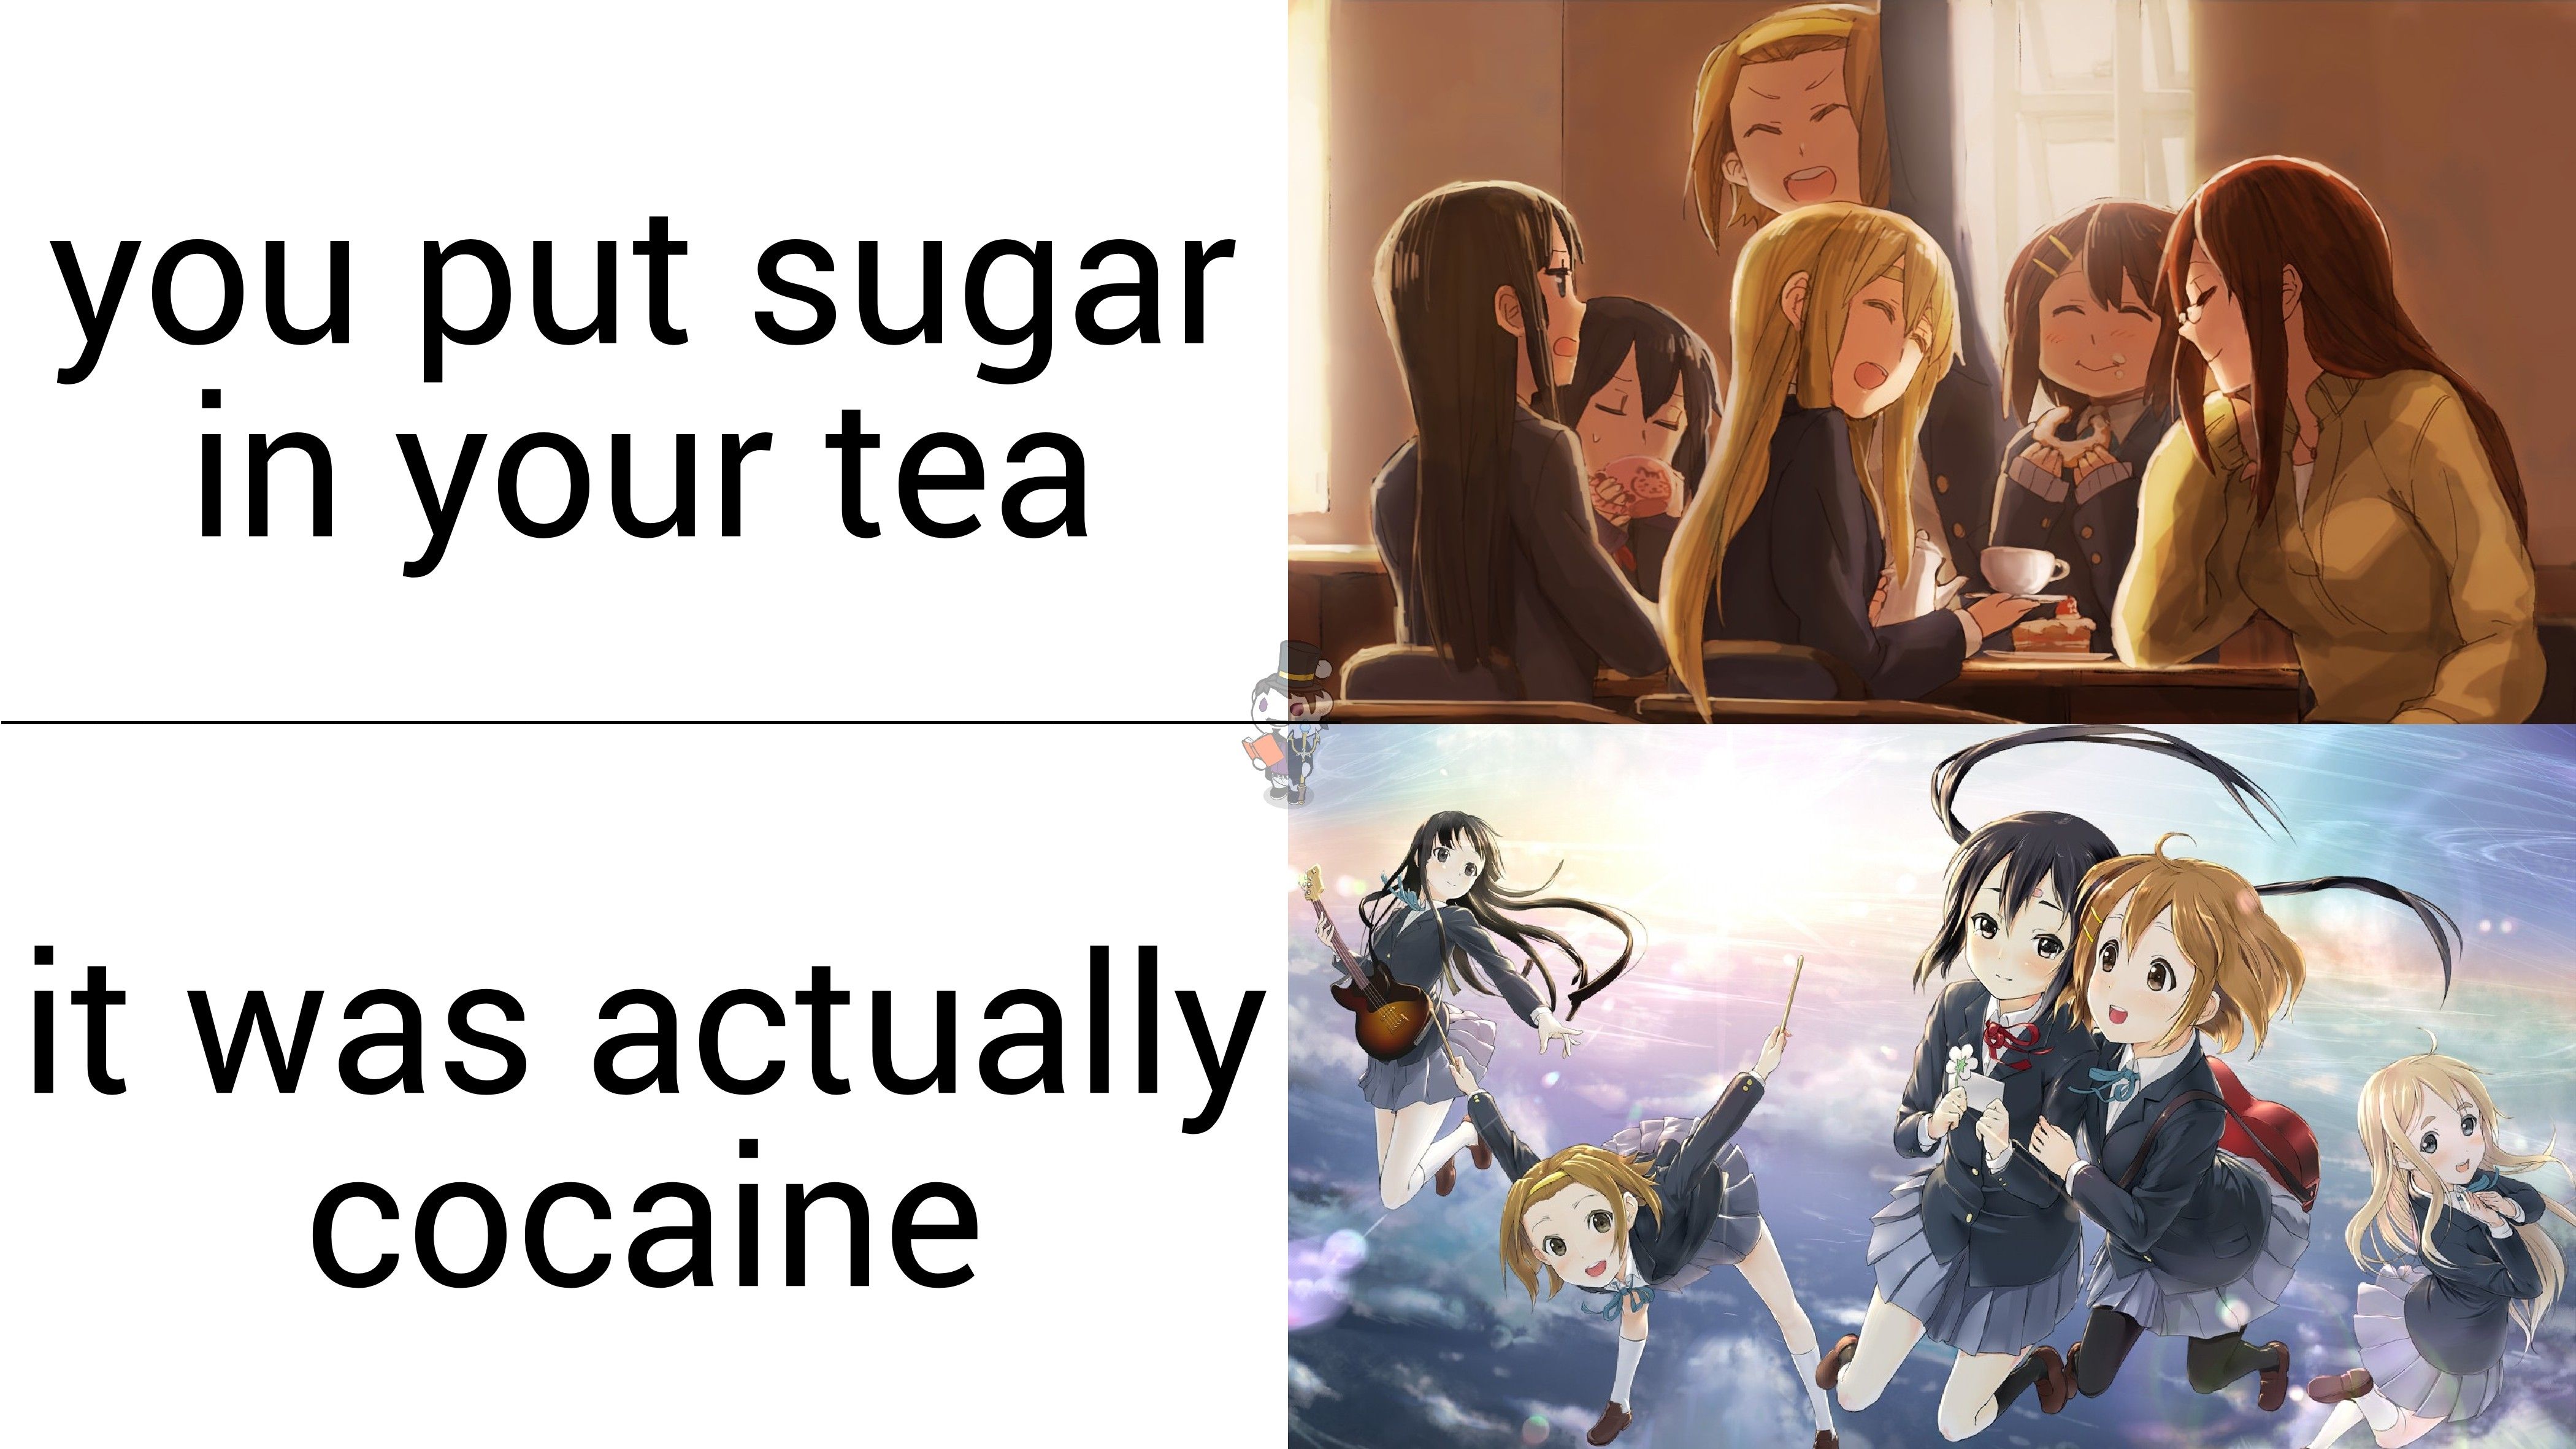 No wonder they have tea every day